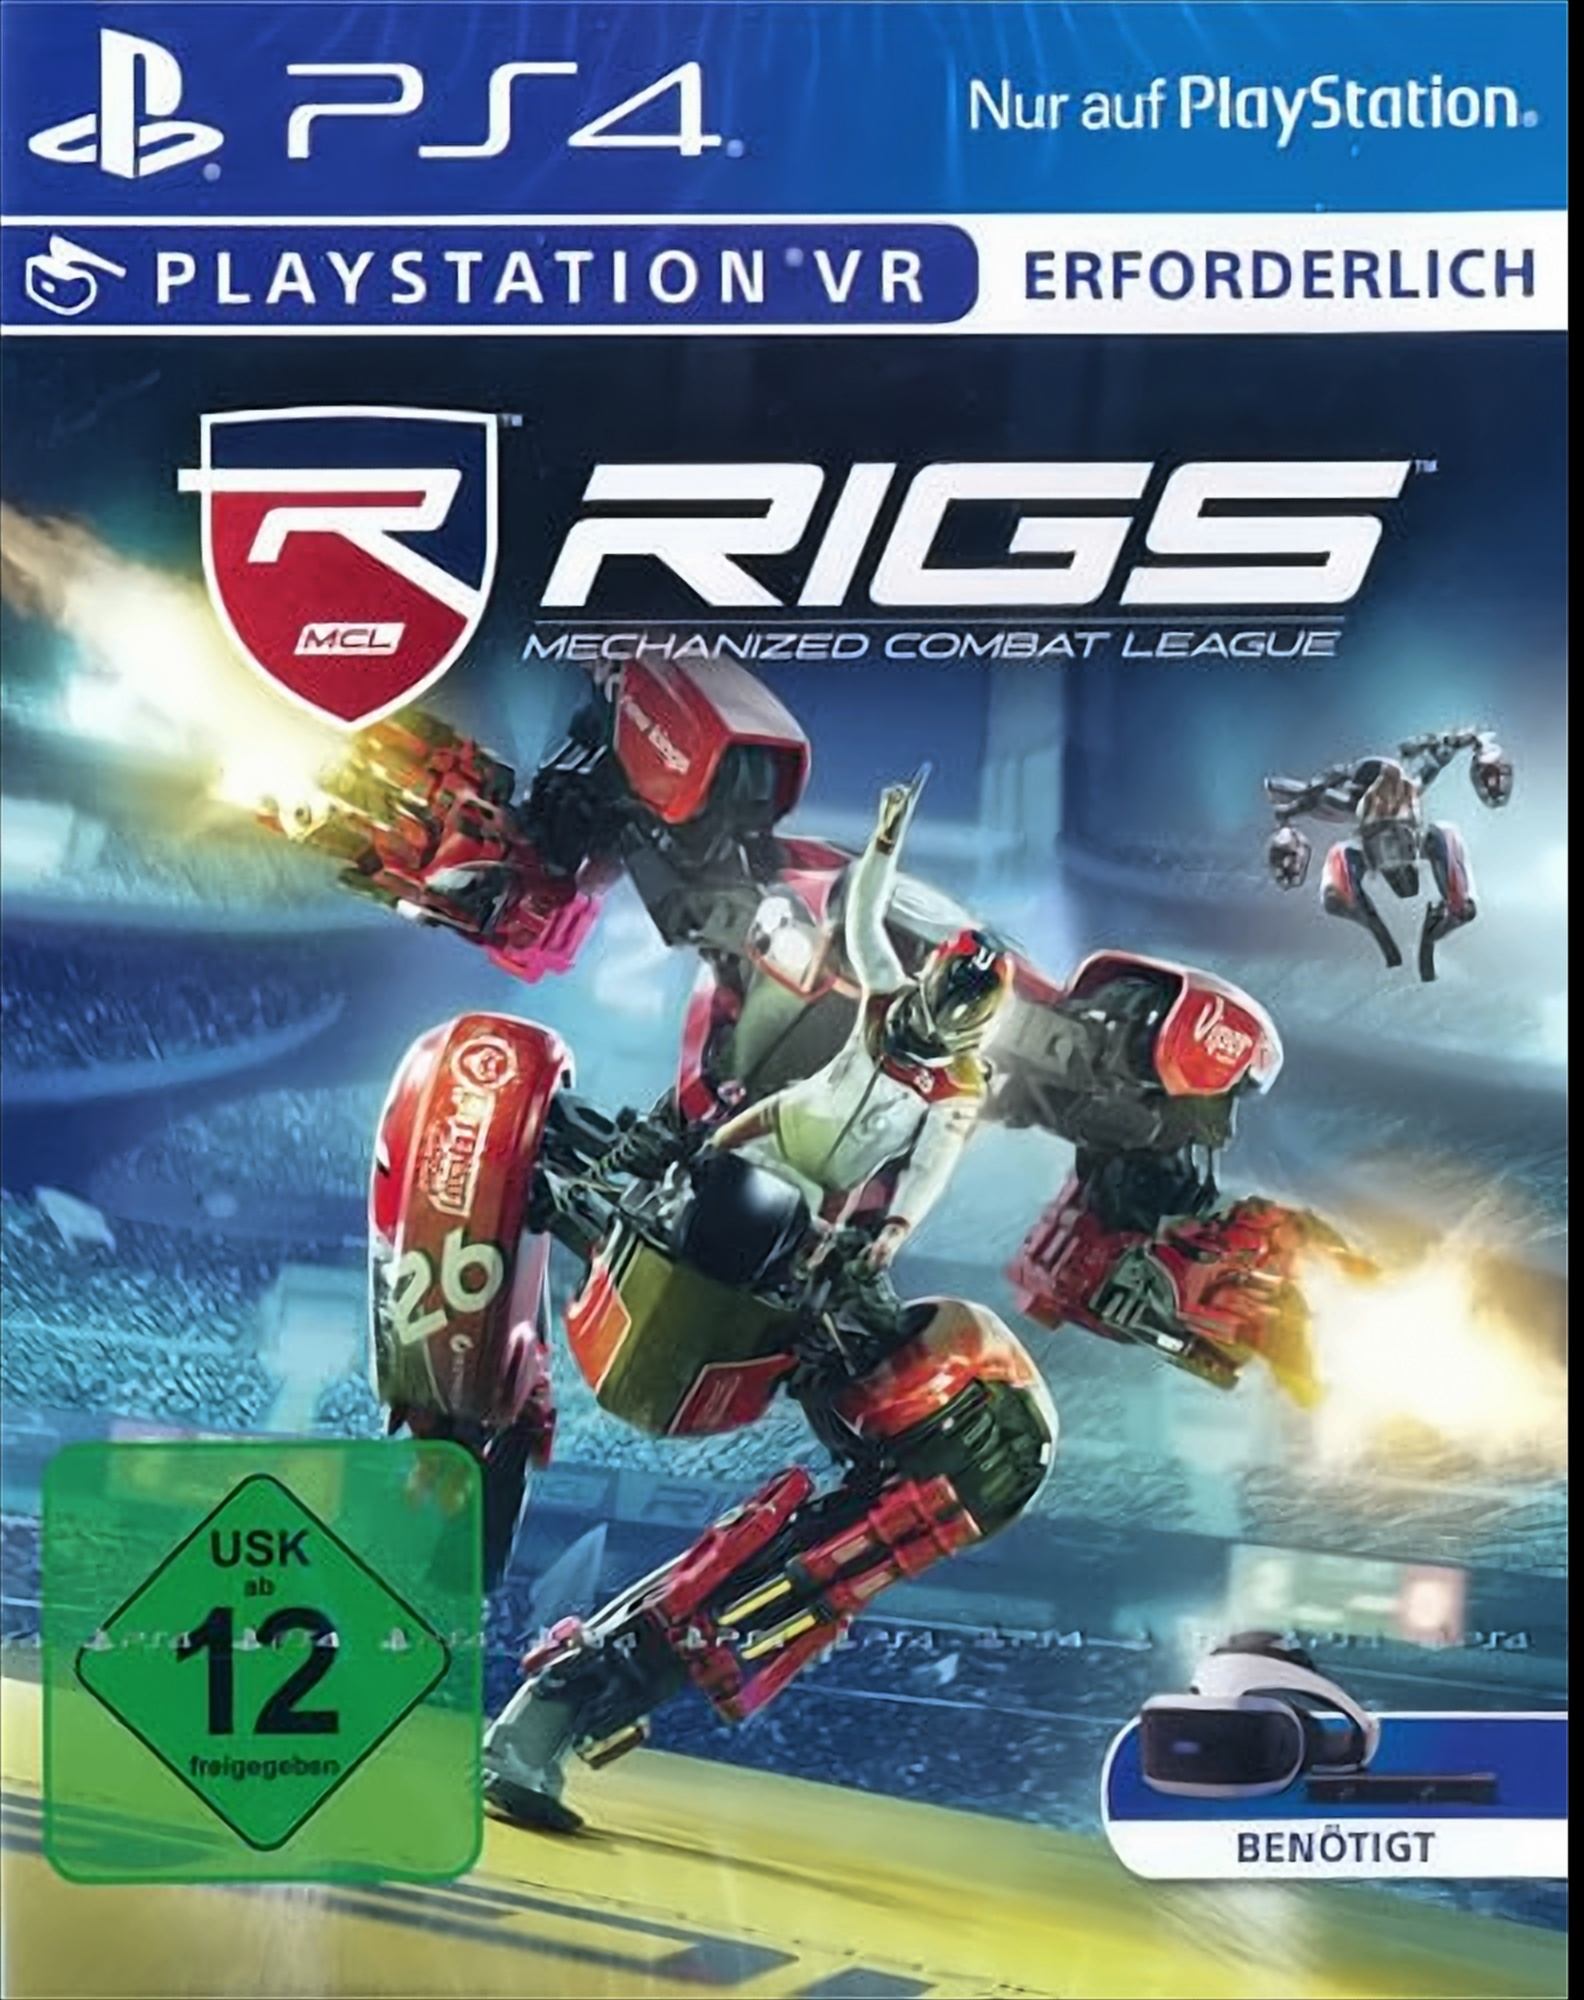 [PlayStation Combat (only 4] Mechanized League - RIGS: VR)